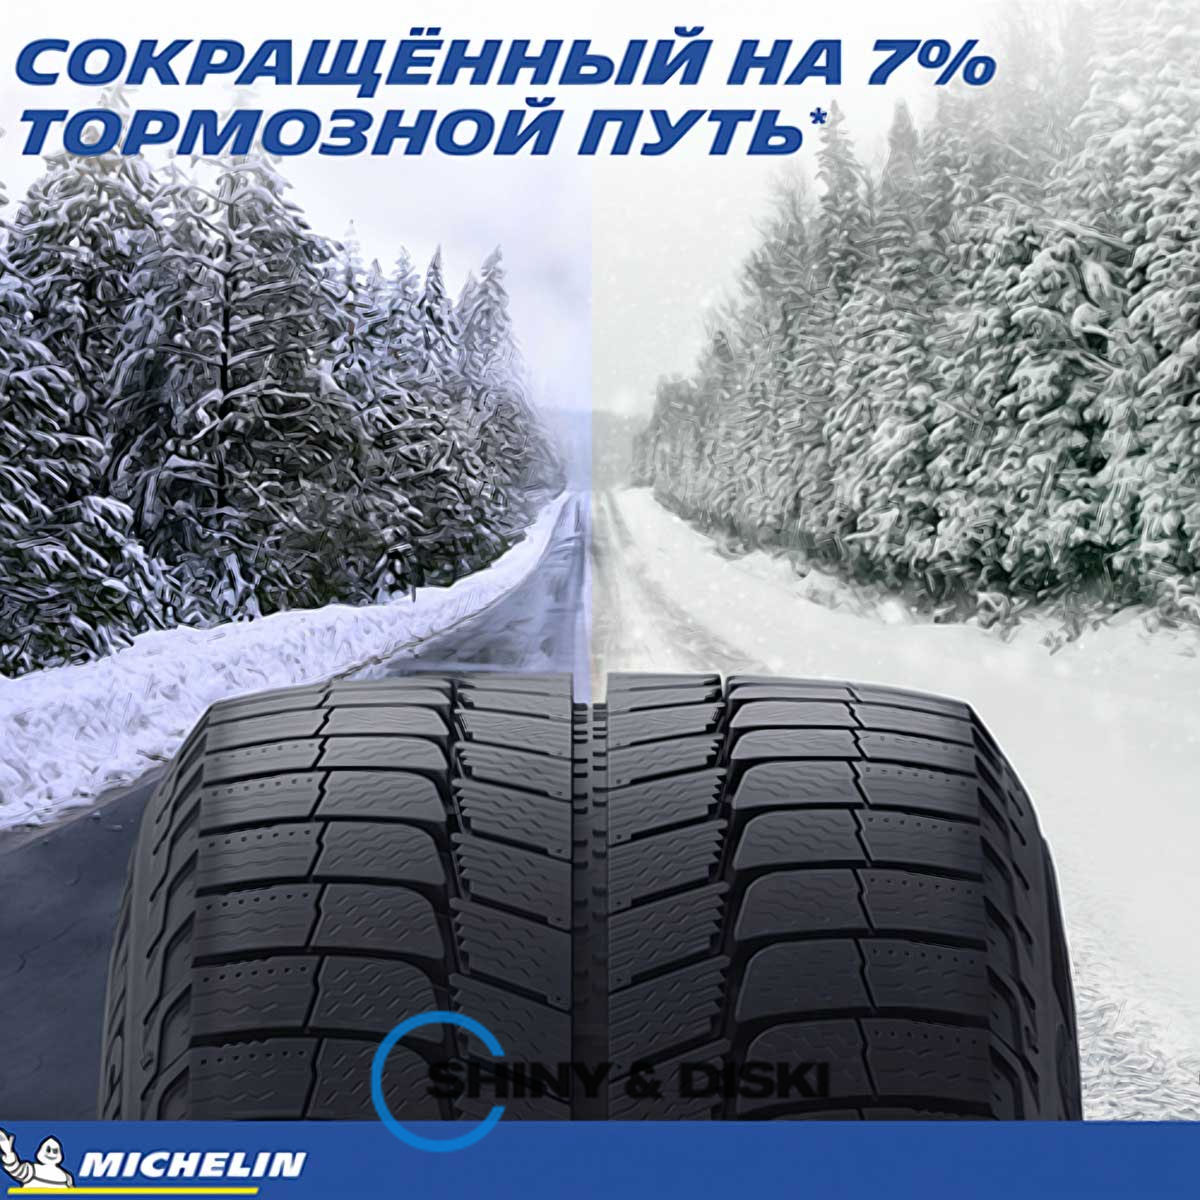 покрышки michelin x-ice xi3+ 205/50 r17 89h